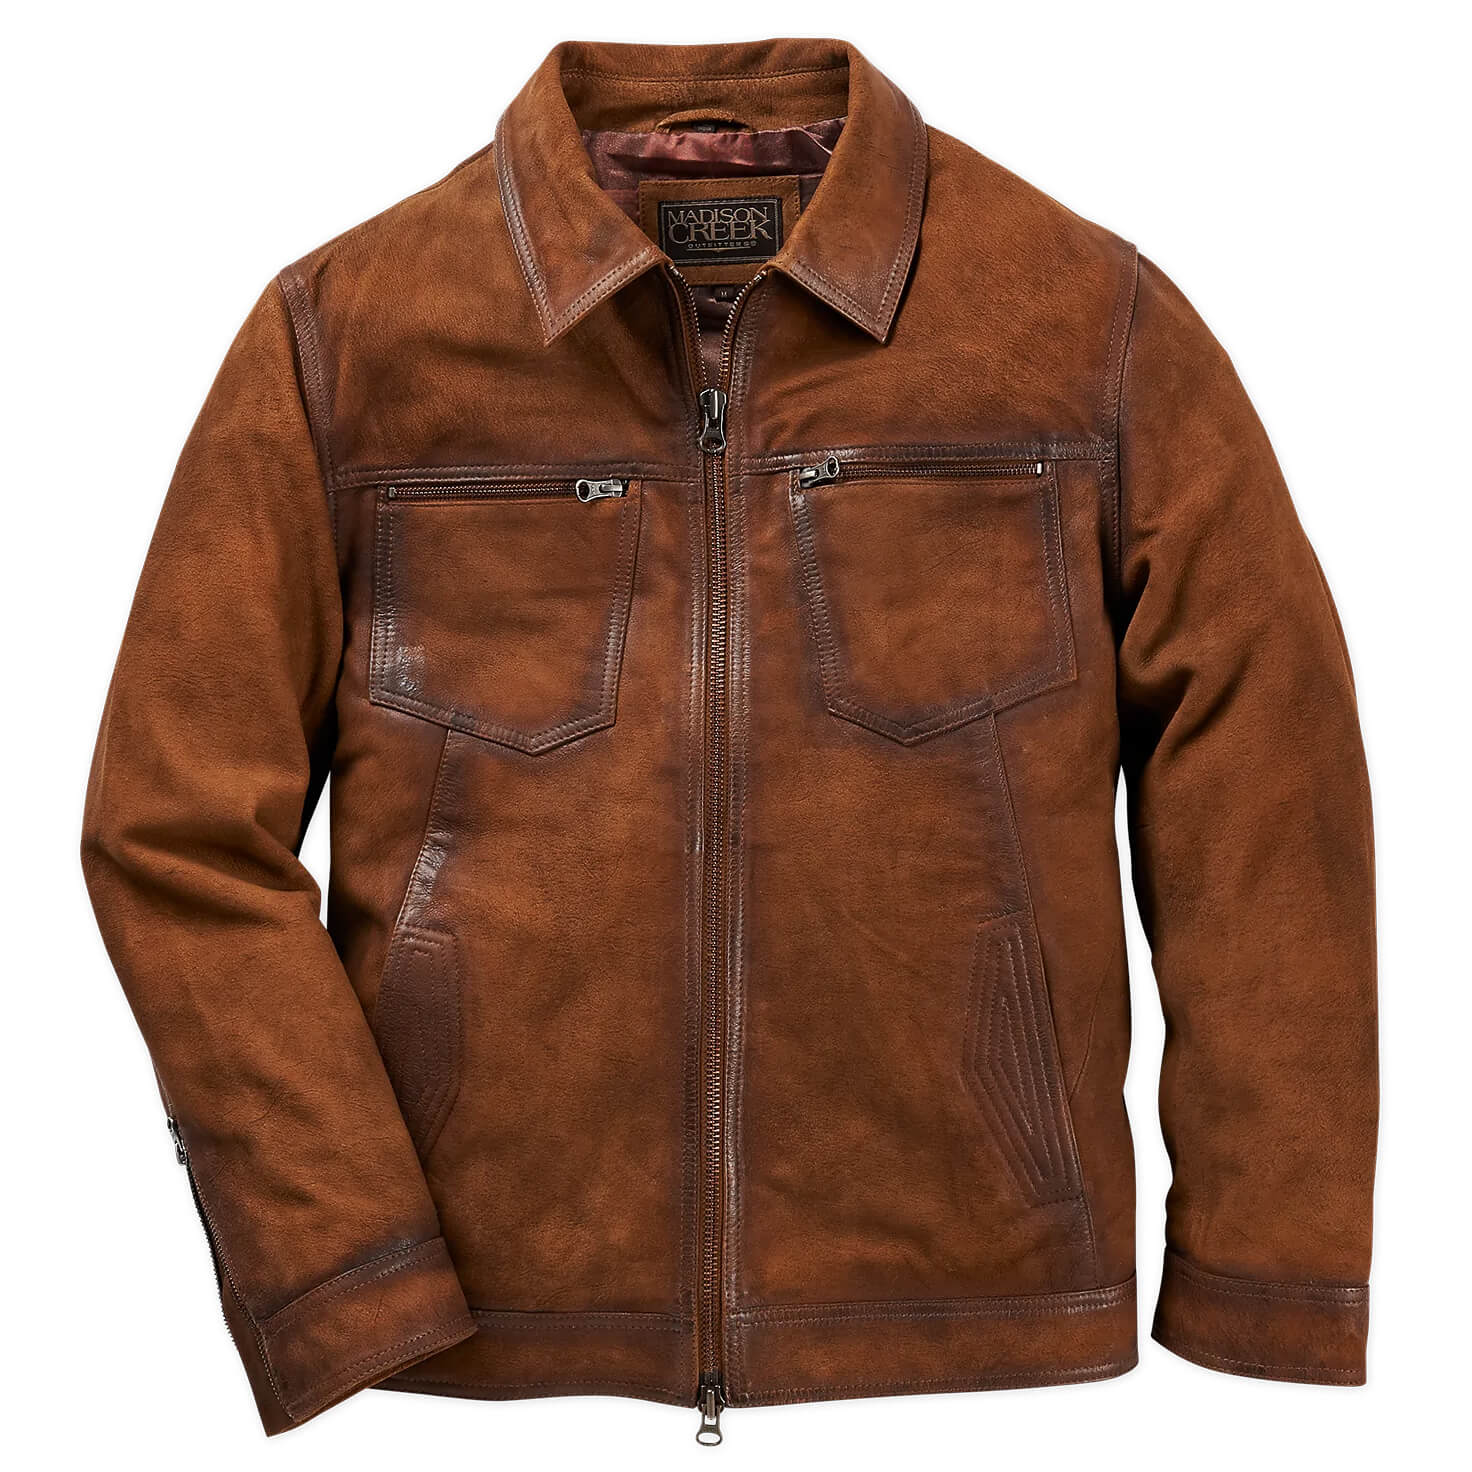 Steamboat Leather Jacket - Madison Creek Outfitters